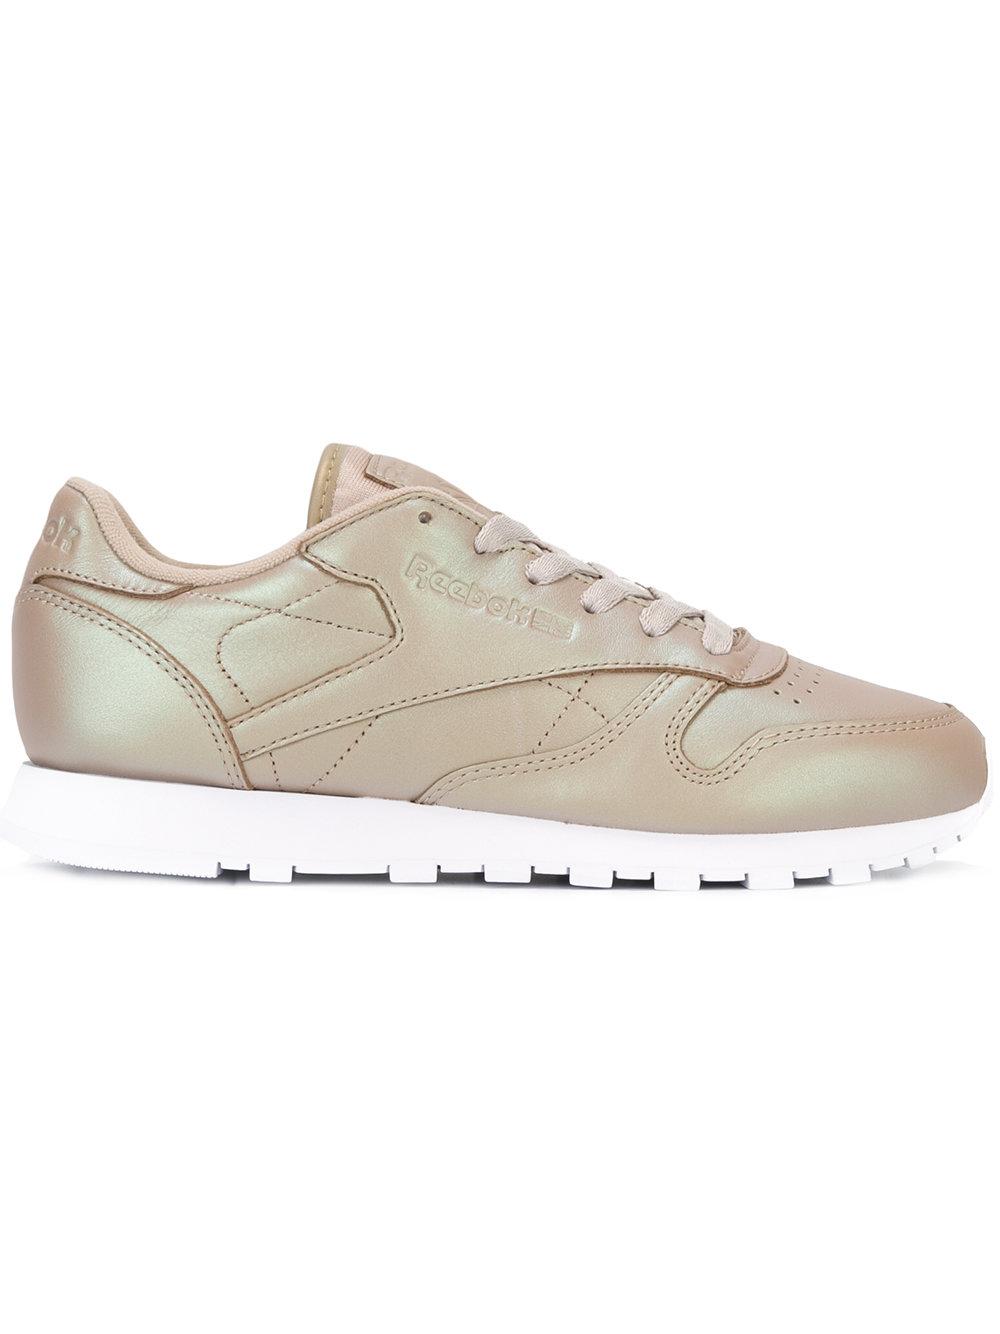 Reebok Leather Classic Hologram Sneakers in Natural | Lyst